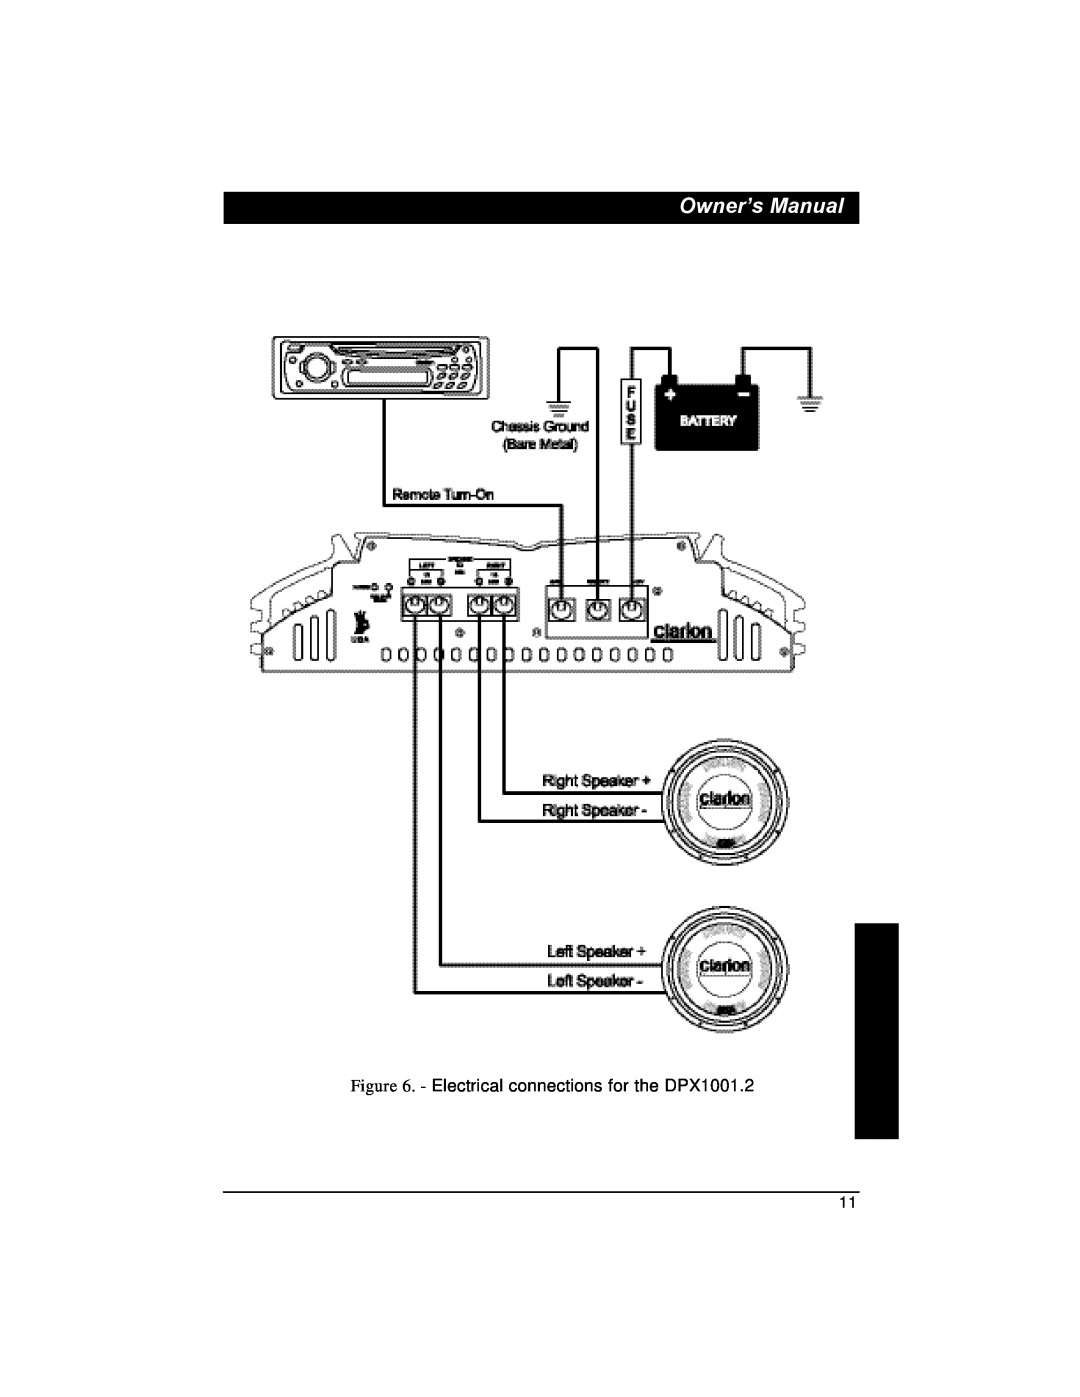 Clarion DPX1001.2 installation manual 